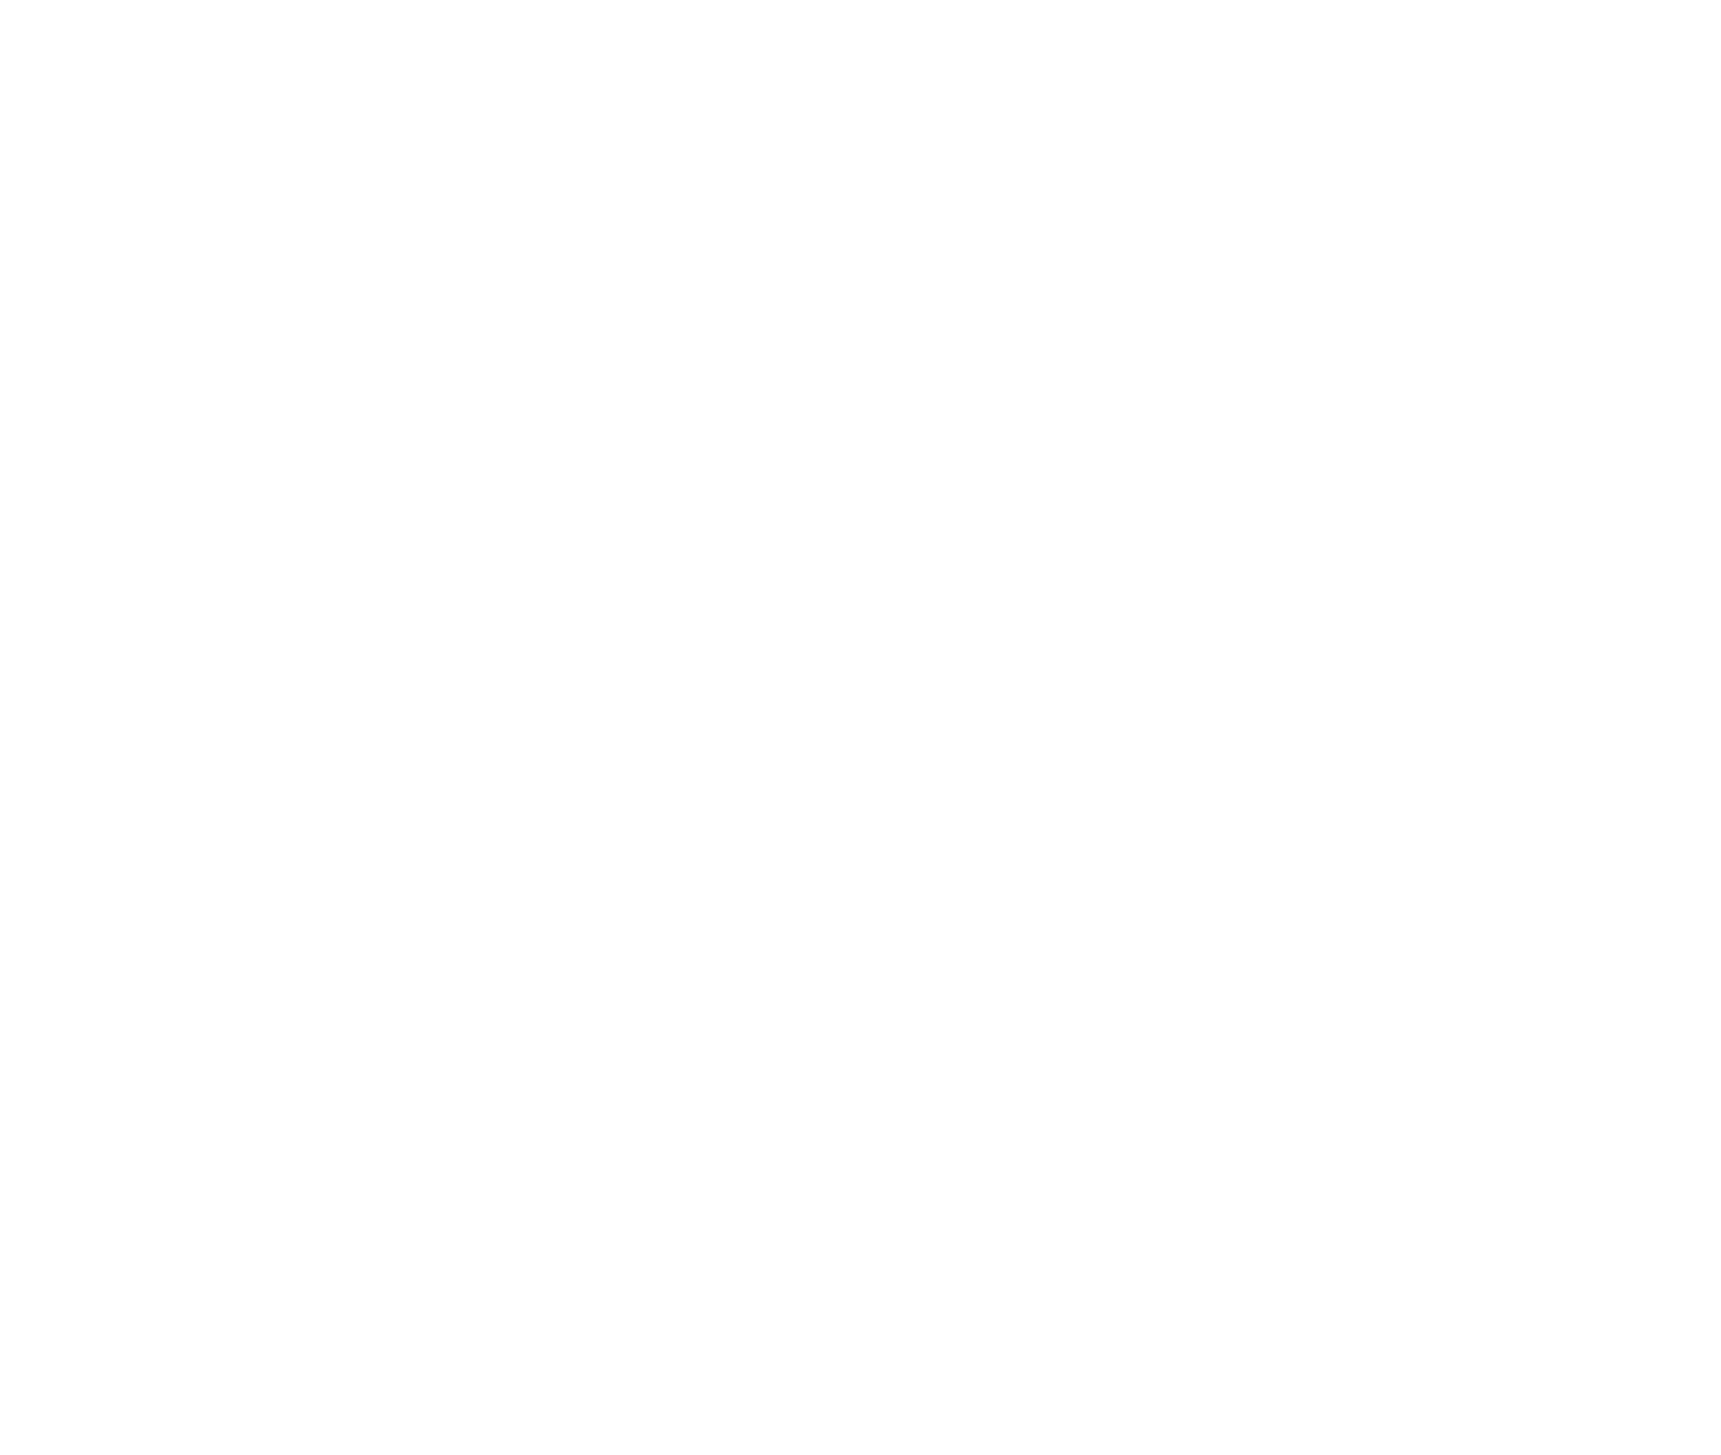 Bally's Corporation logo for dark backgrounds (transparent PNG)